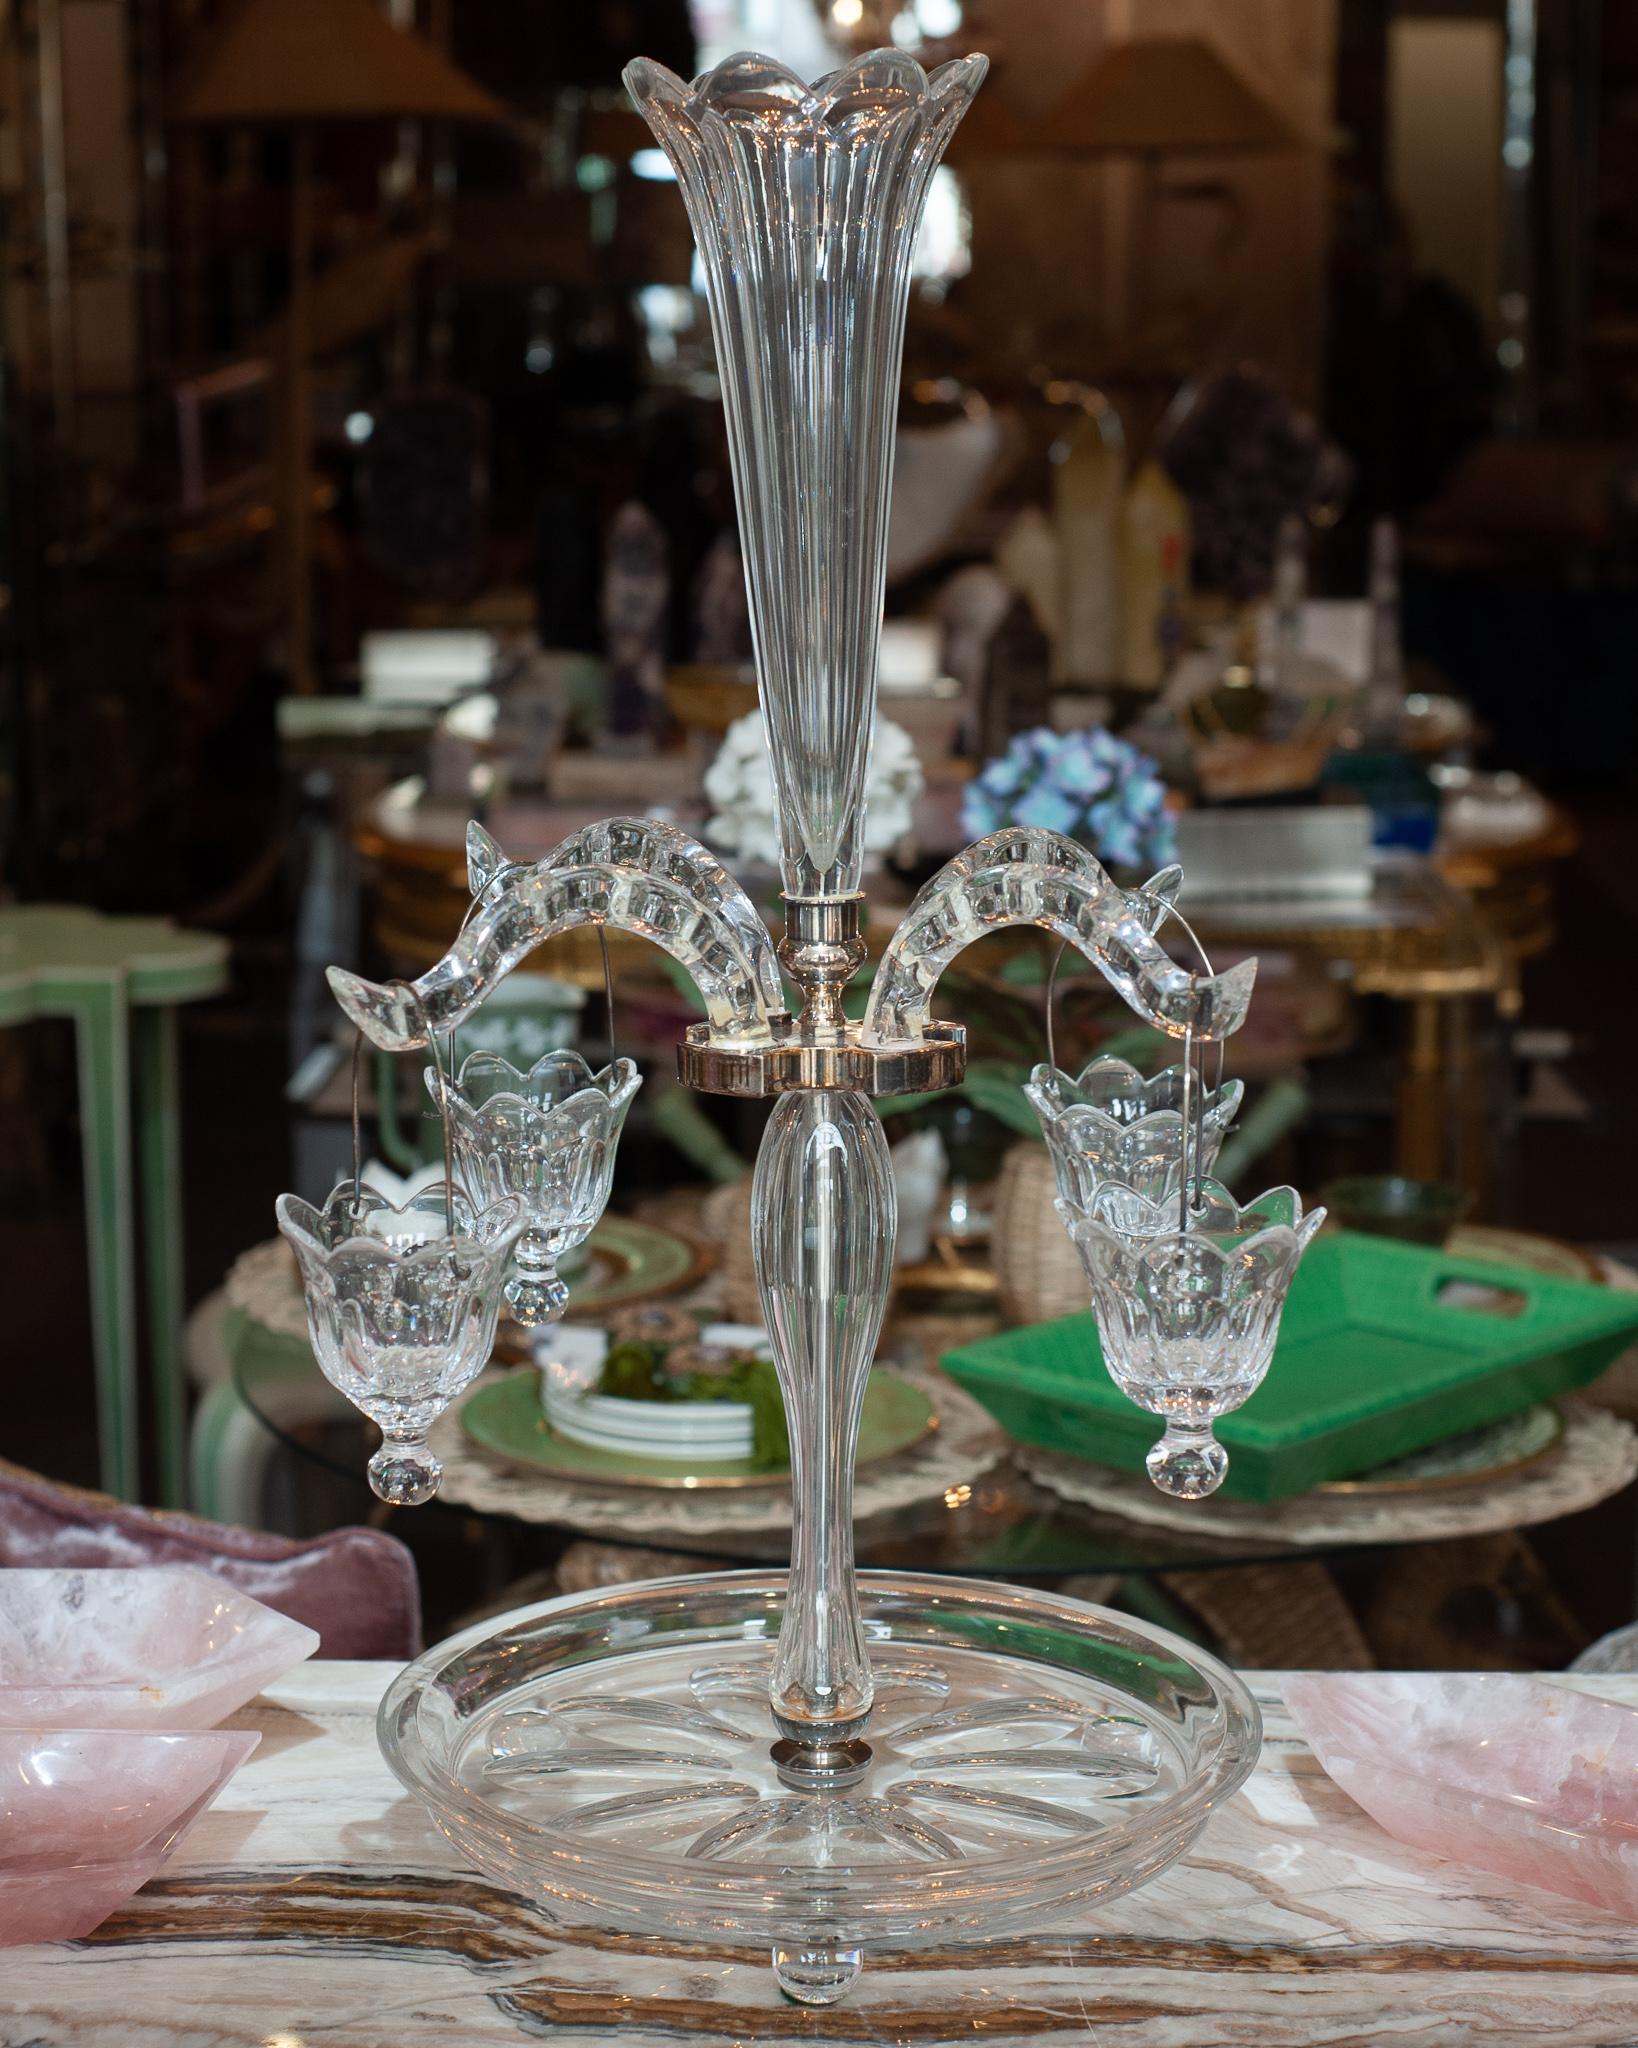 When setting the dinner table, special attention should be paid to your centerpiece. This stunning grand Antique French glass Epergne is the perfect accessory to grace your table. Crystal arms float from a silver-plated frame on the center stem, and